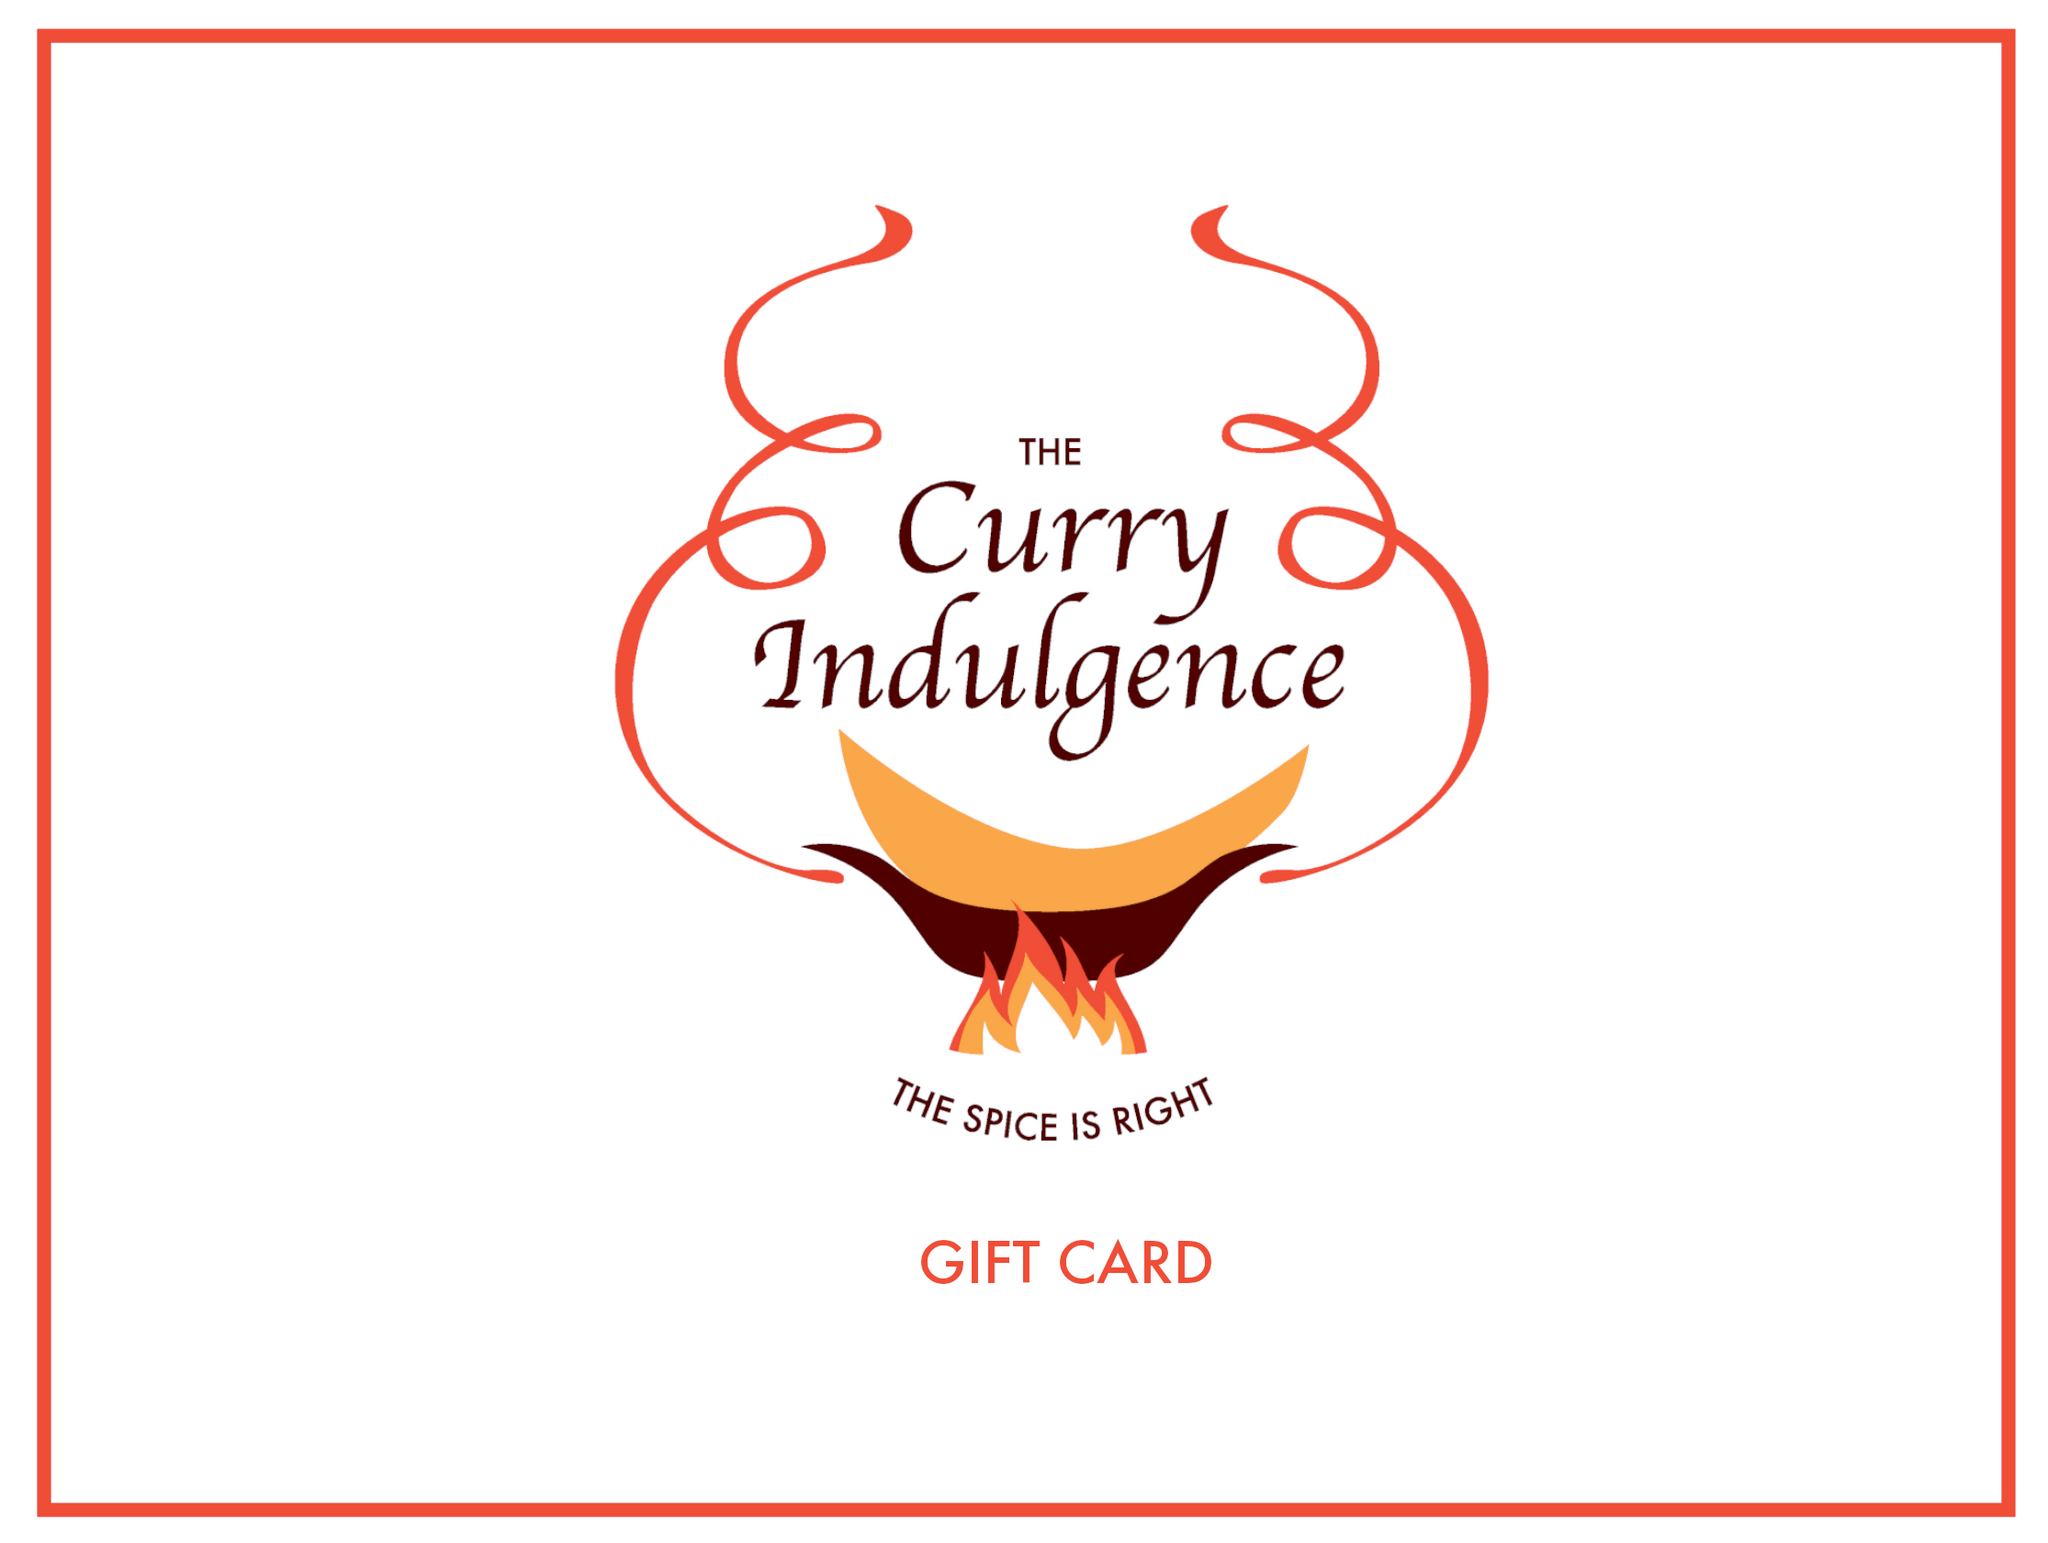 The Curry Indulgence Gift Card